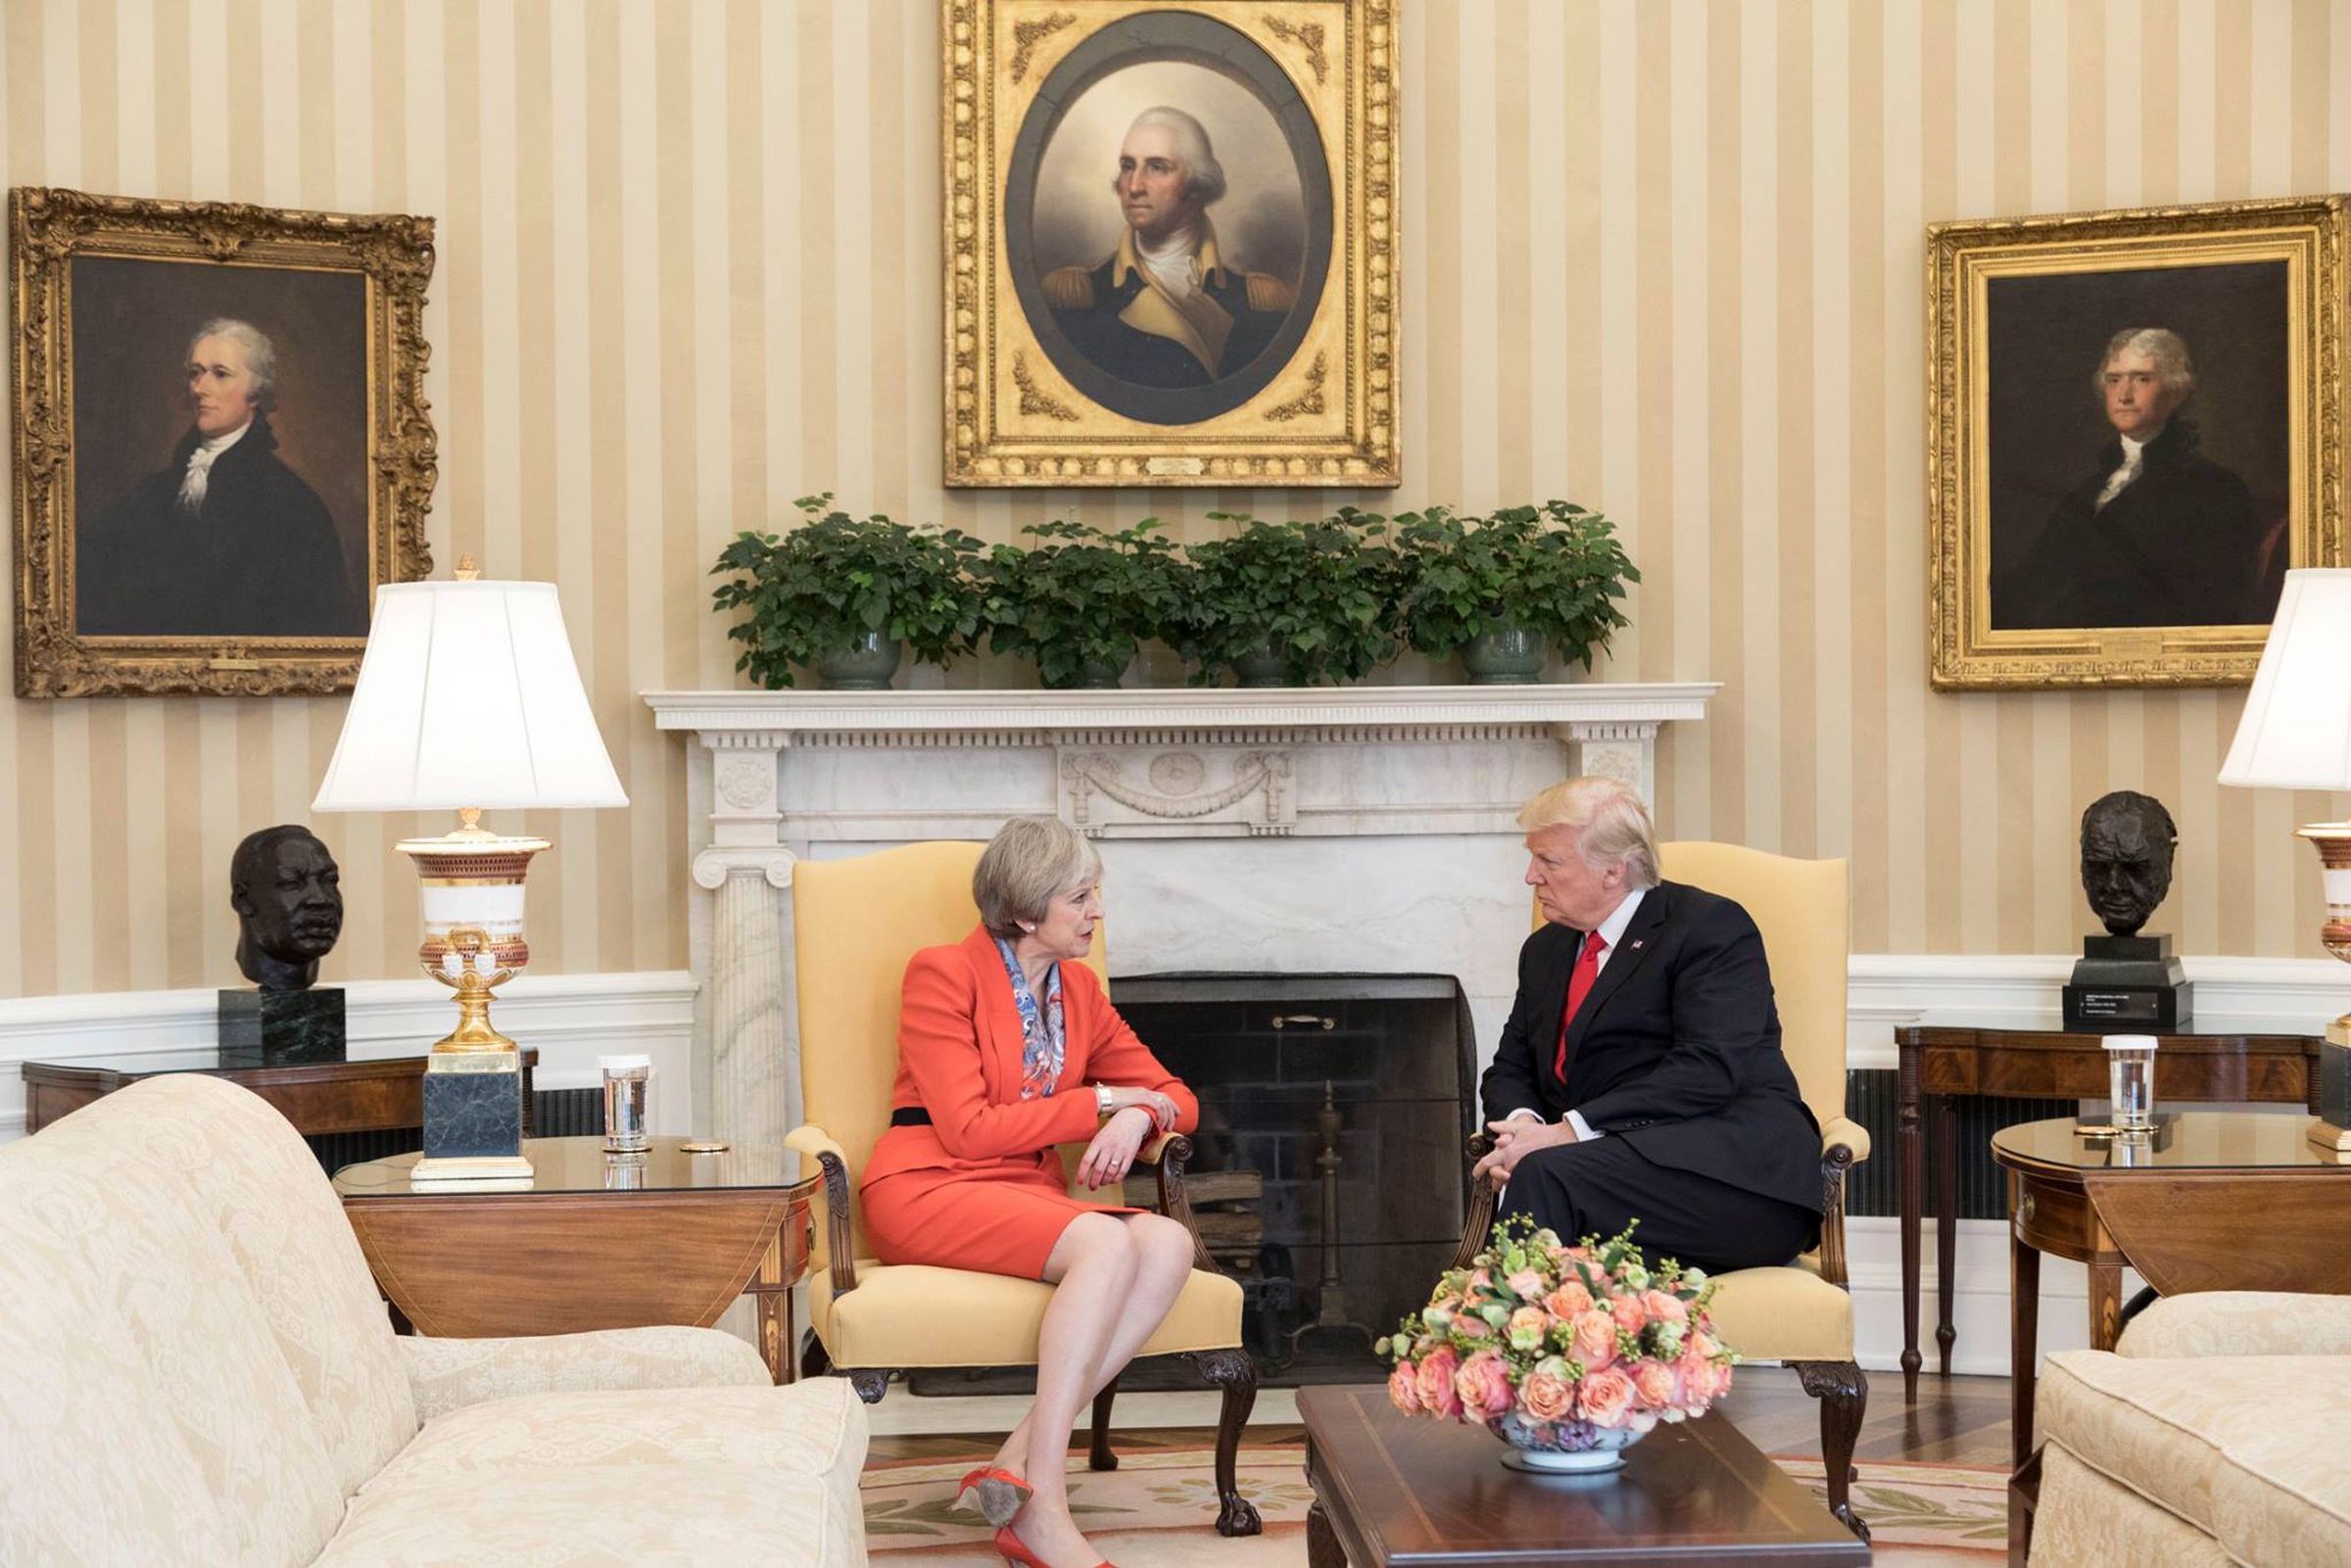 Trump is photographed meeting with British Prime Minister Theresa May, with portraits of past presidents in the frame. It borrows a nearly identical framing as one of the other 50 photos in the only gallery of Craighead’s work so far.